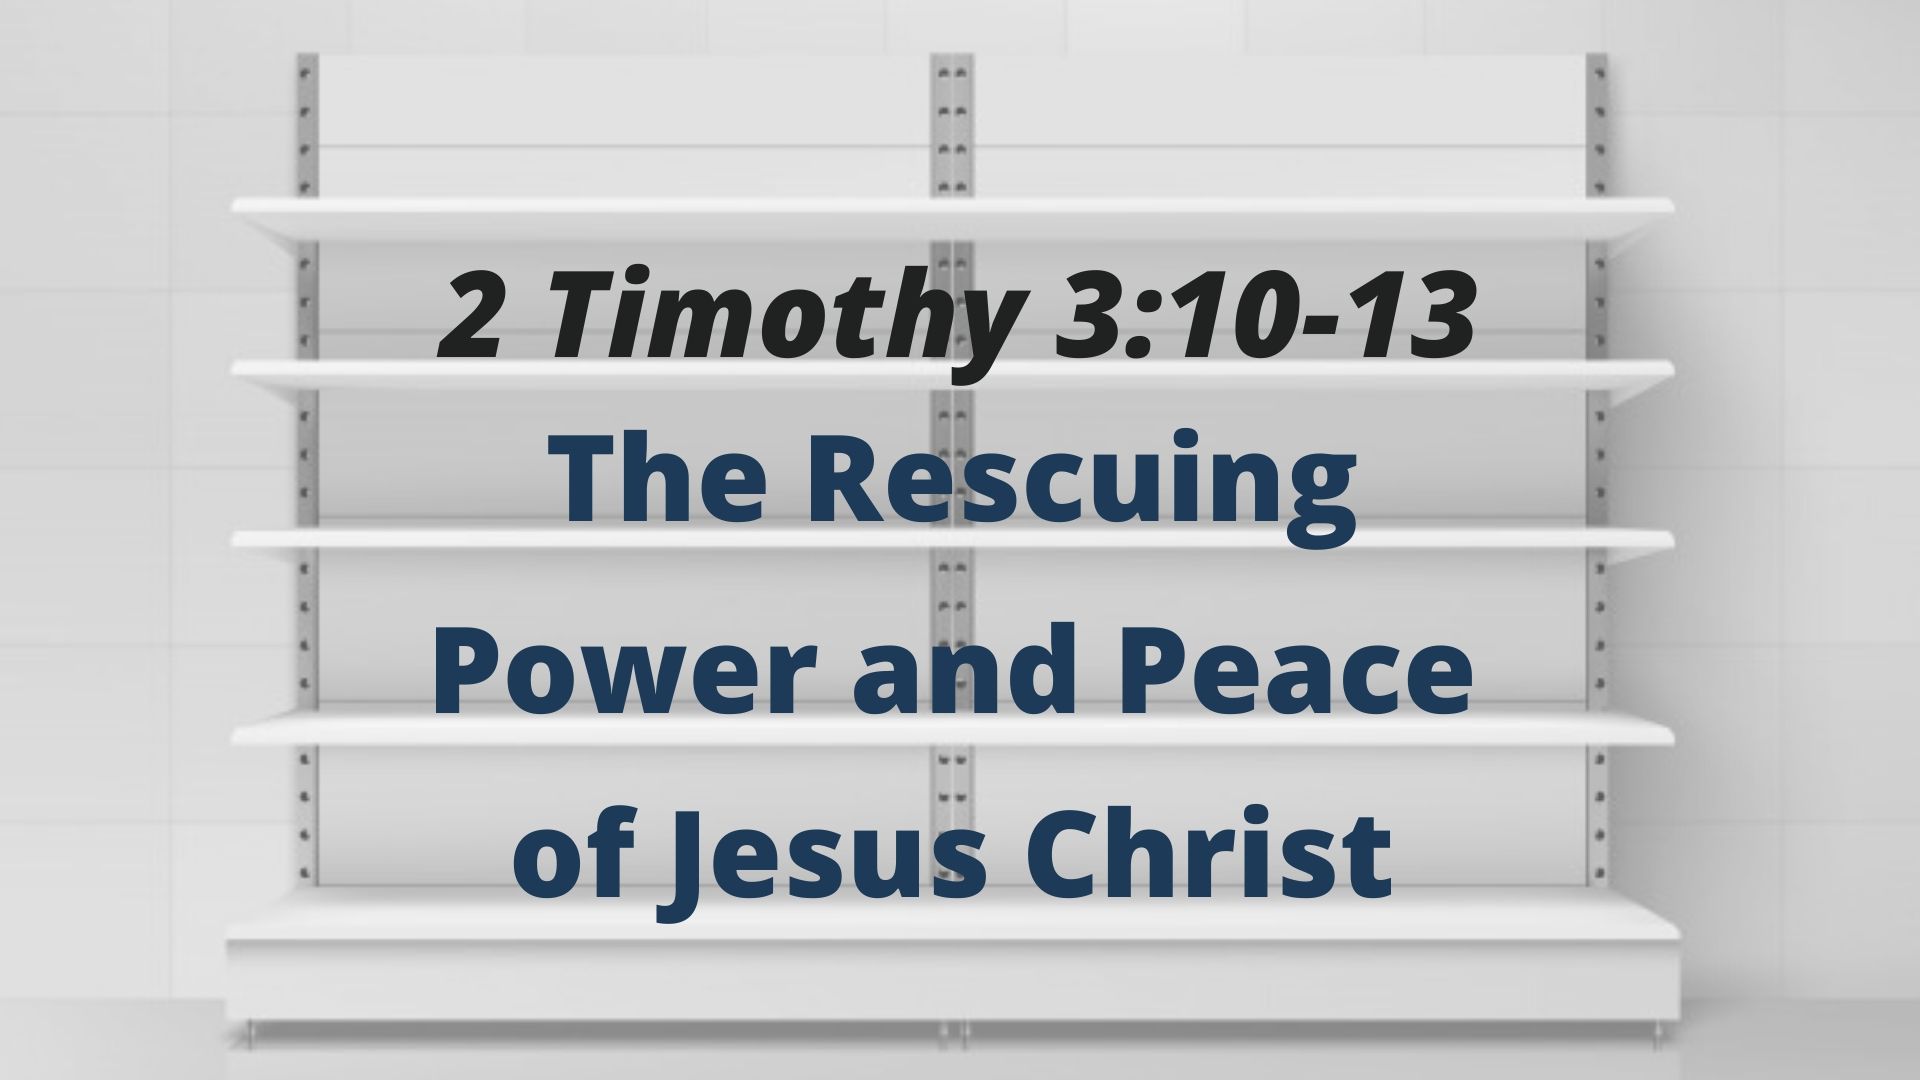 The Rescuing Power and Peace of Jesus Christ (2 Timothy 3:10-13) Image